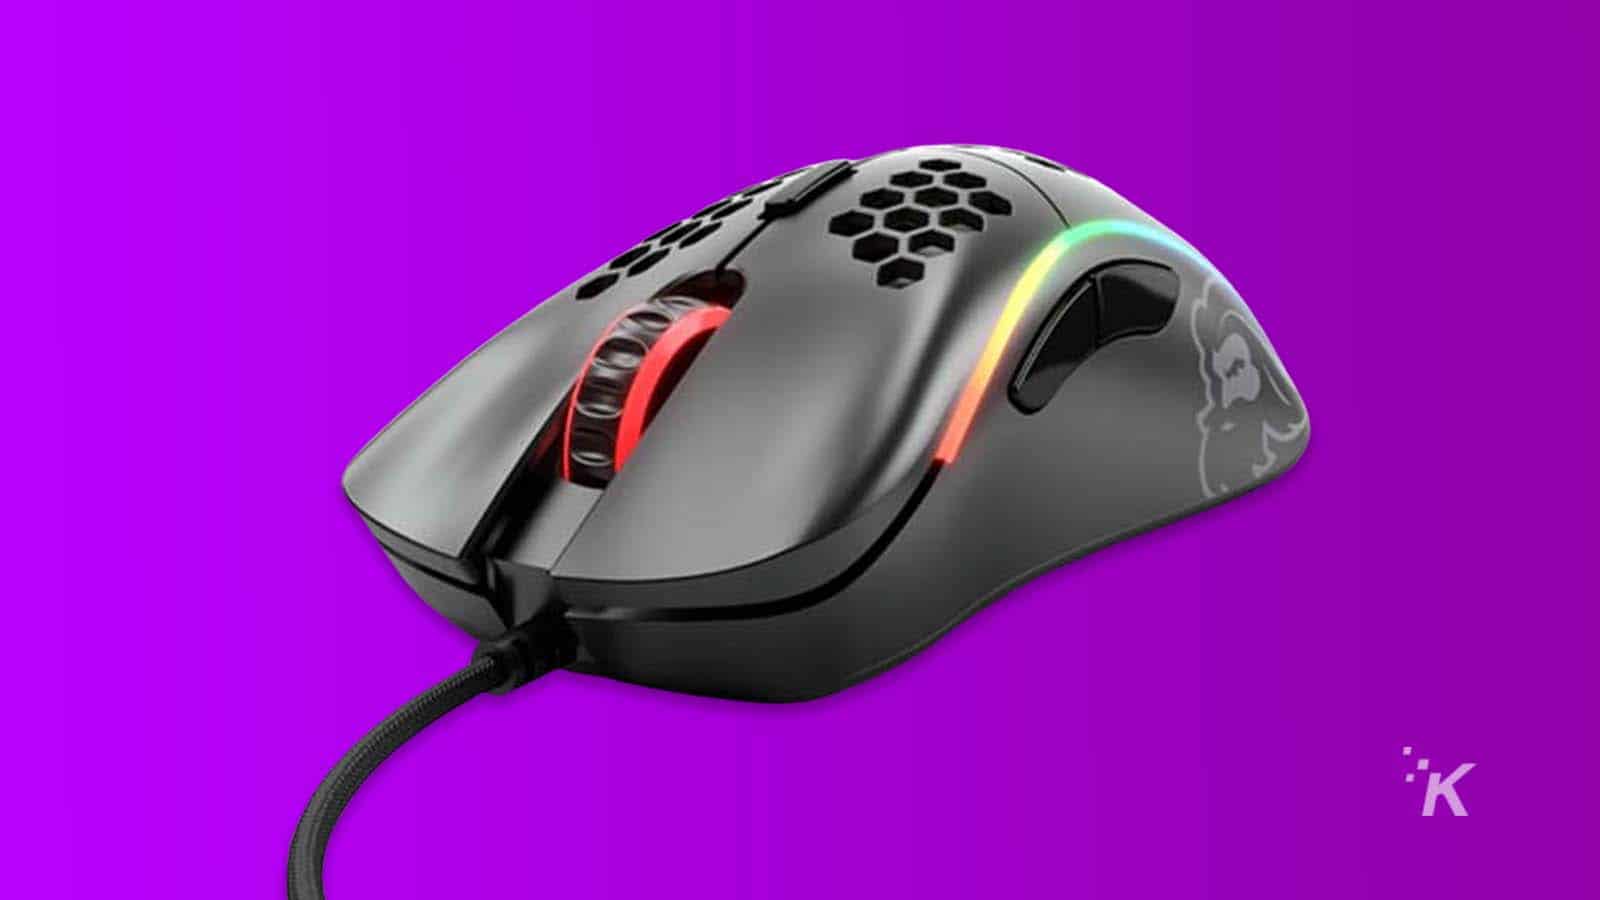 mouse gaming pc